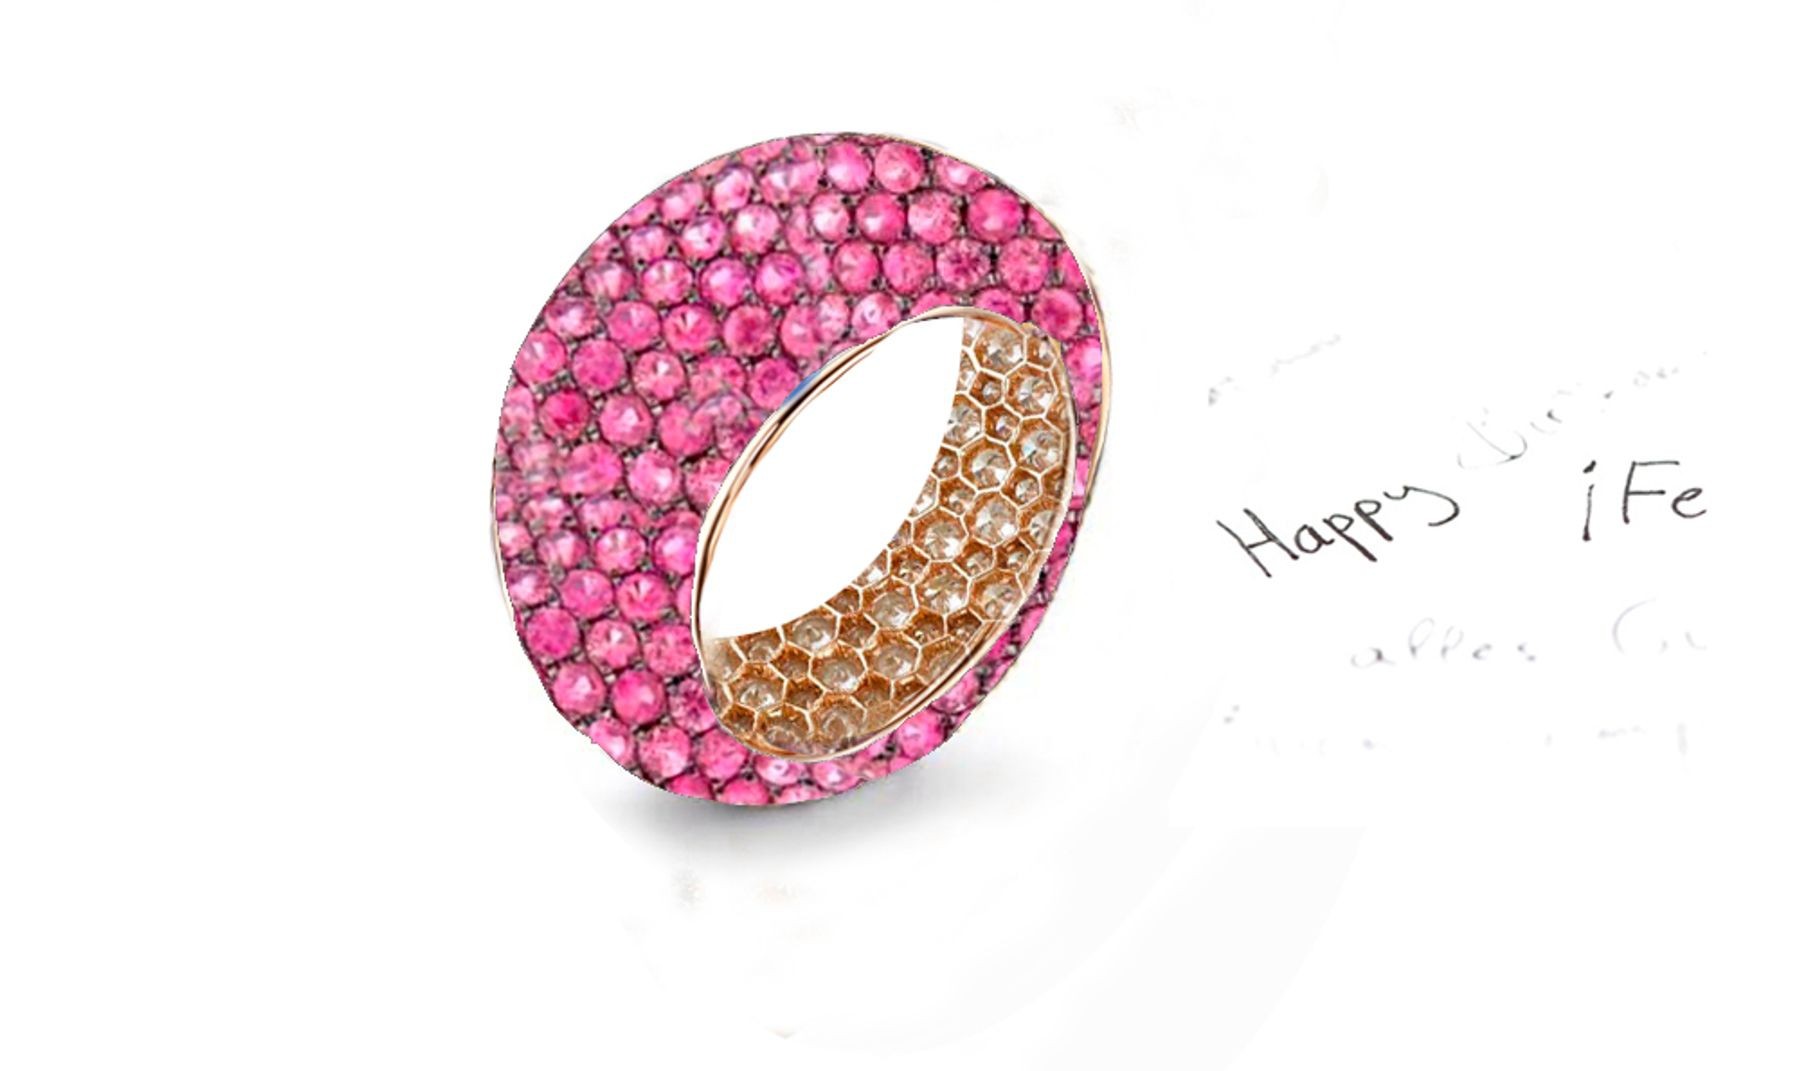 Mark Another Year of Romance With  Eternity Rings Featuring Diamonds & Rubies, Emeralds & Sapphires